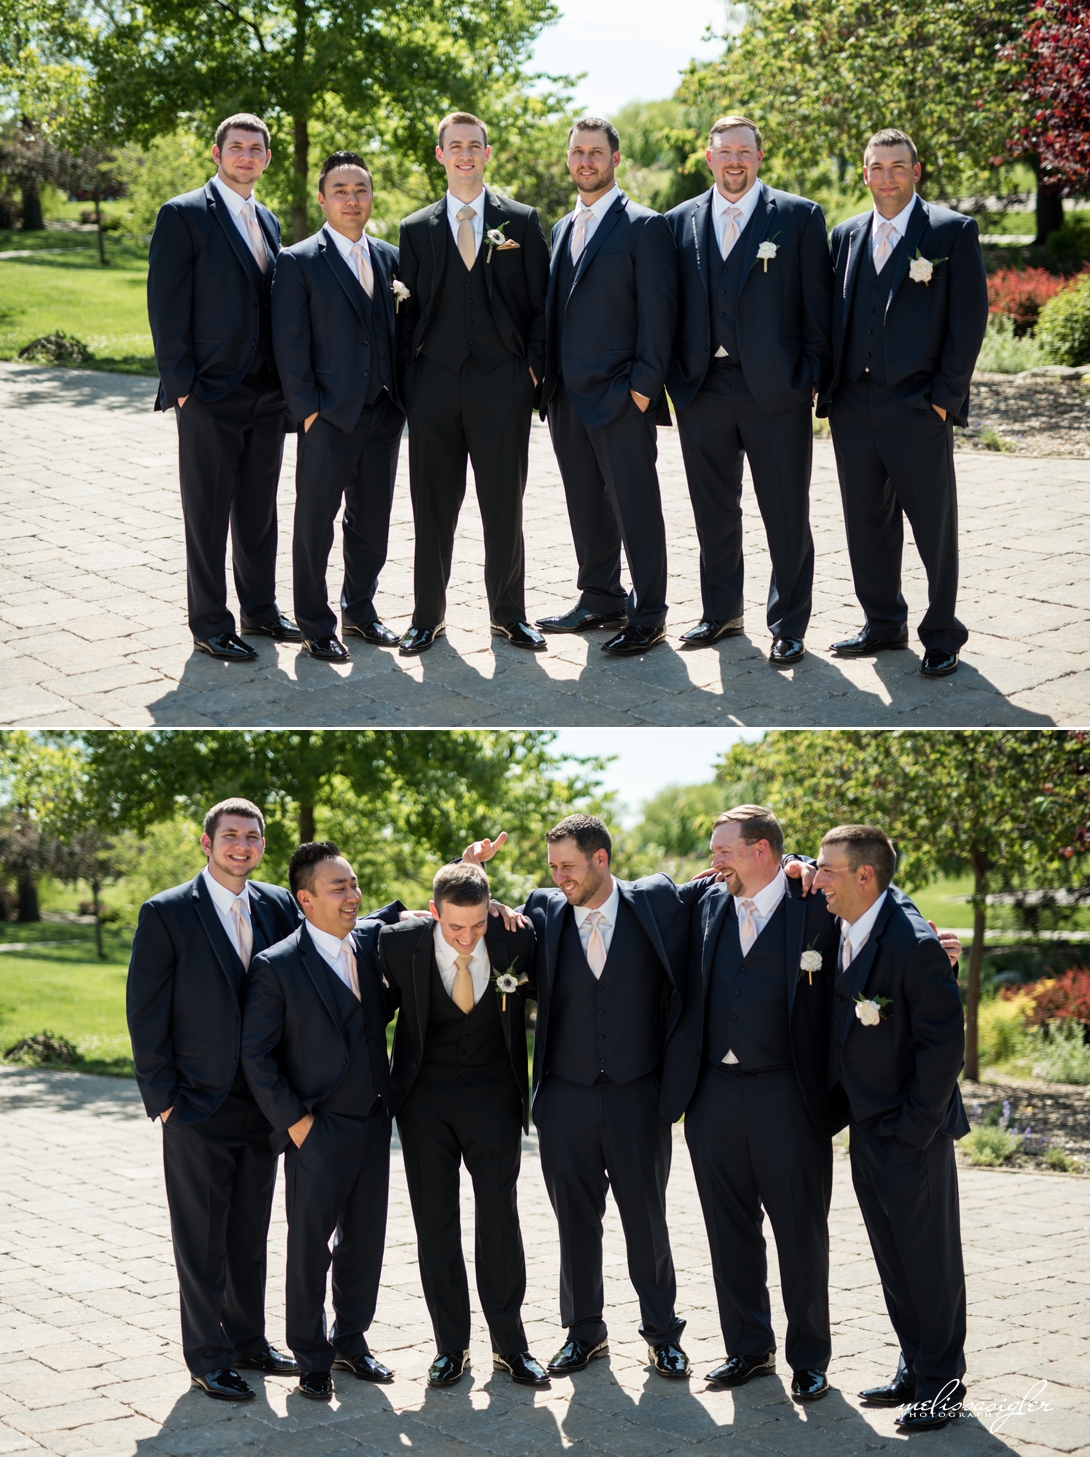 Wedding party pictures at Lake Shawnee garden